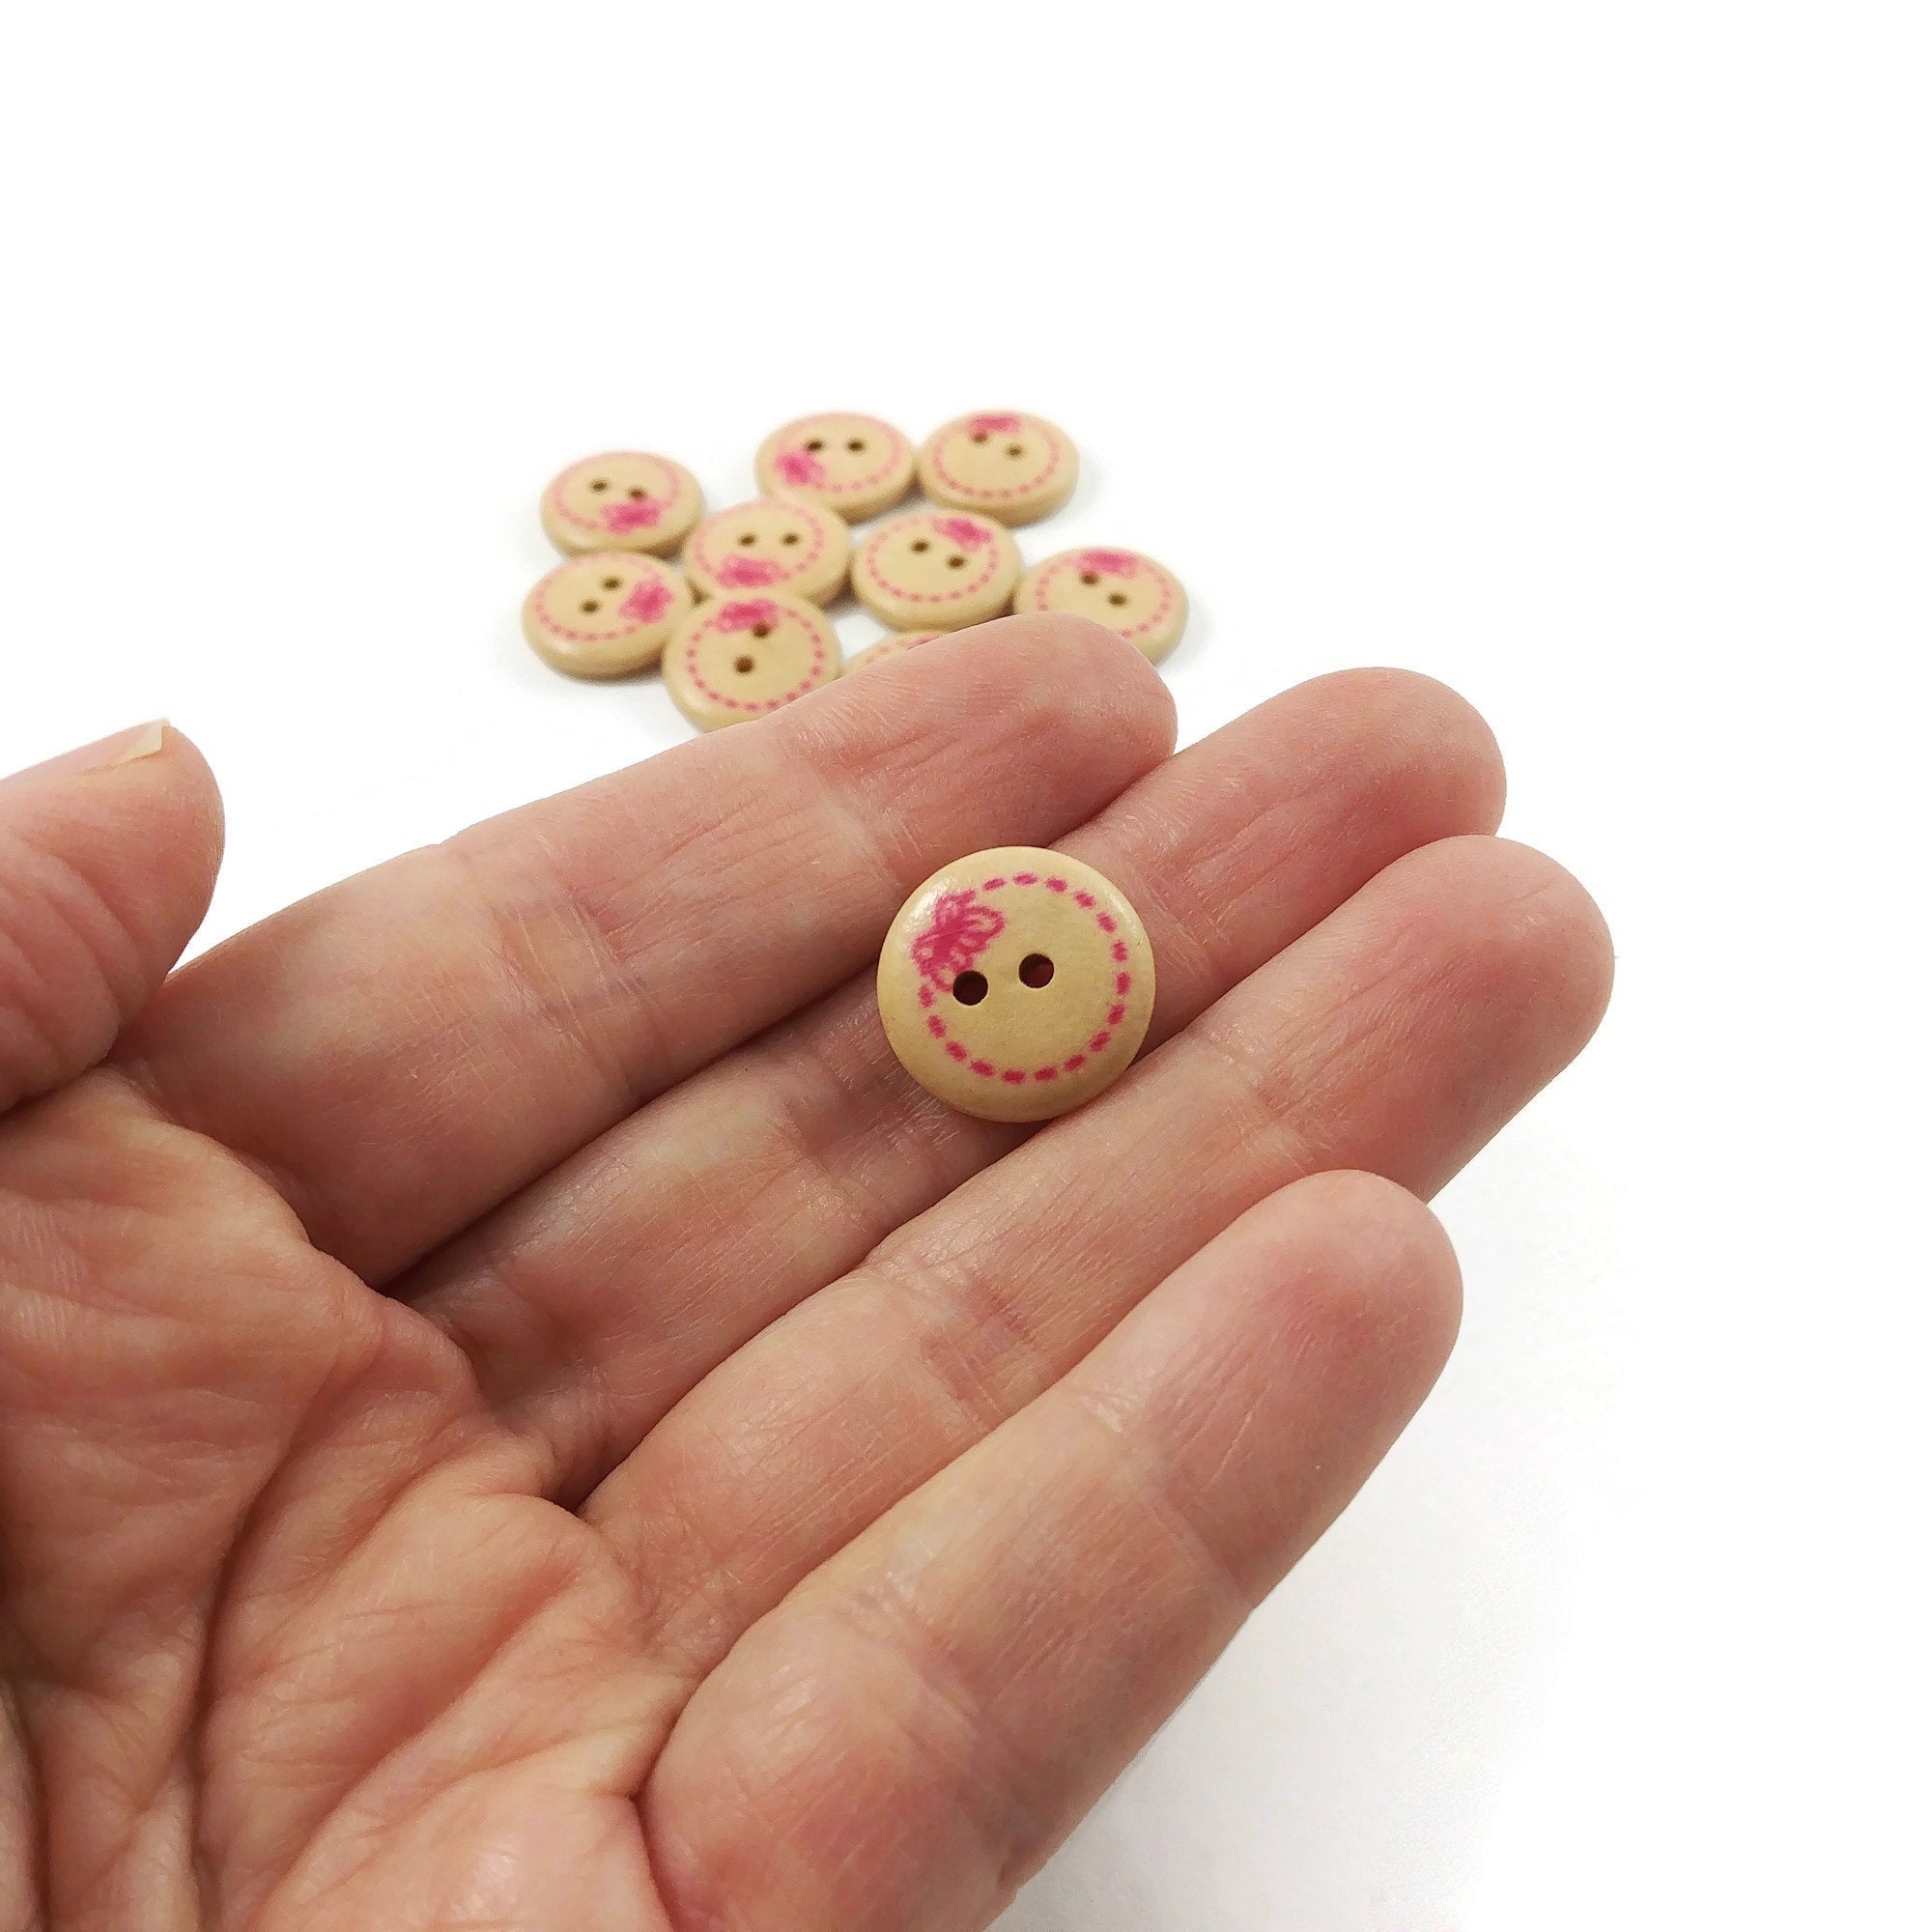 10 wood painted sewing buttons - pink bow 15mm